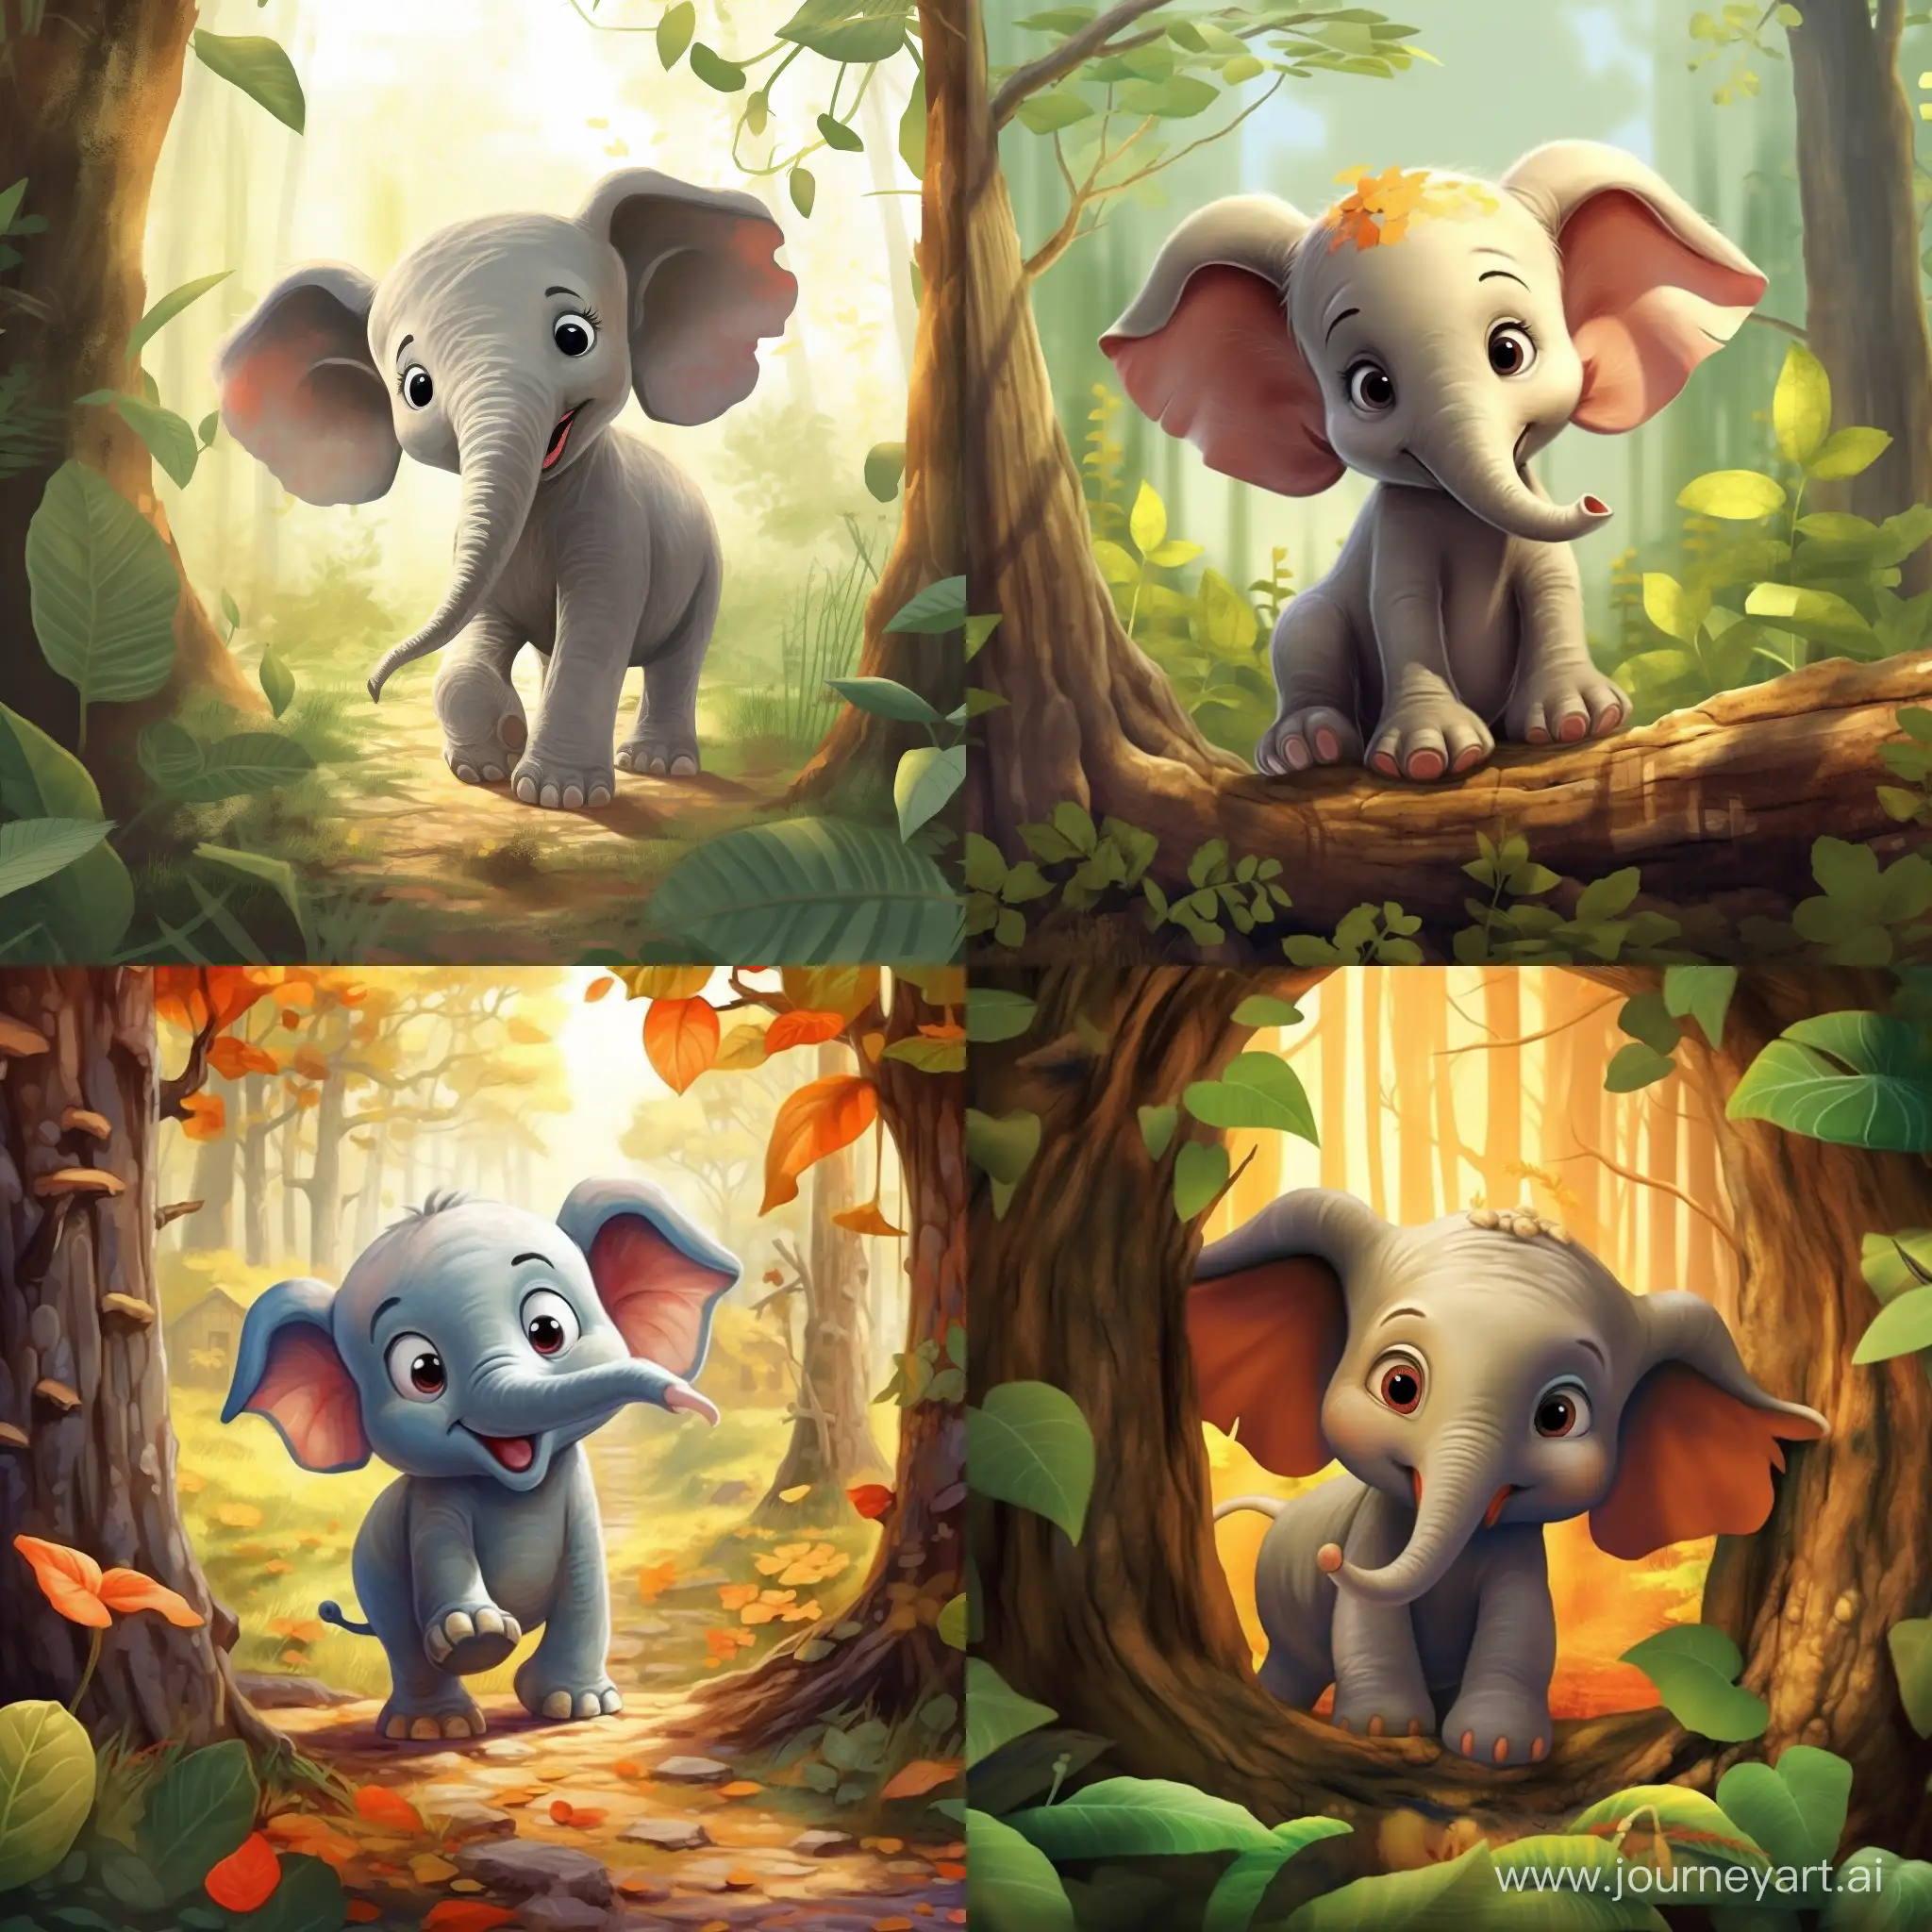 Adorable-Cartoon-Elephant-Ellie-Playing-Hide-and-Seek-in-the-Forest